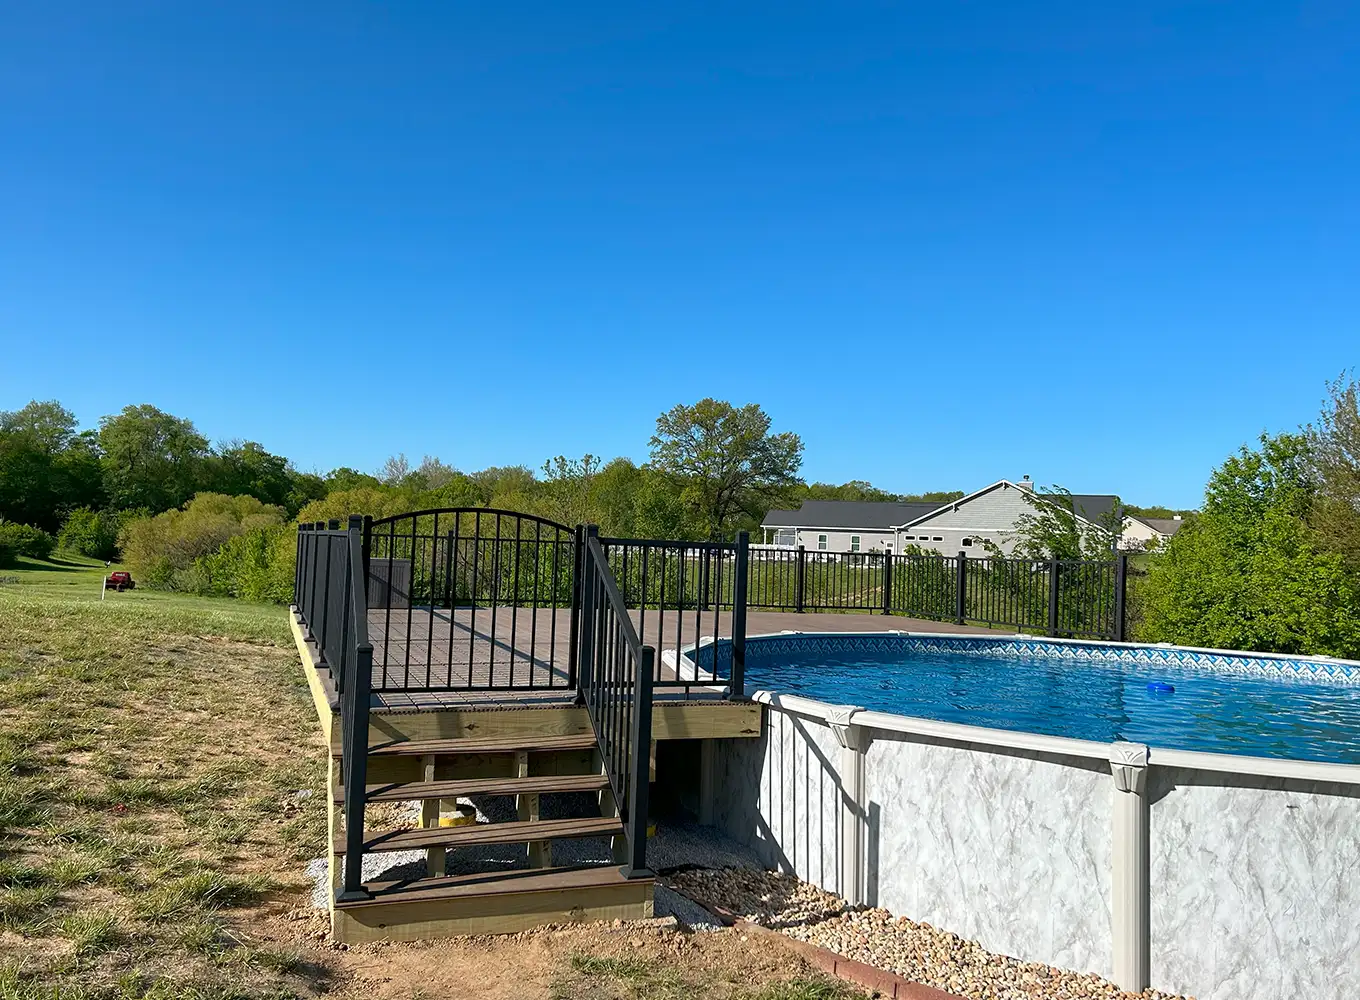 above-ground wood or composite pool deck springfield illinois